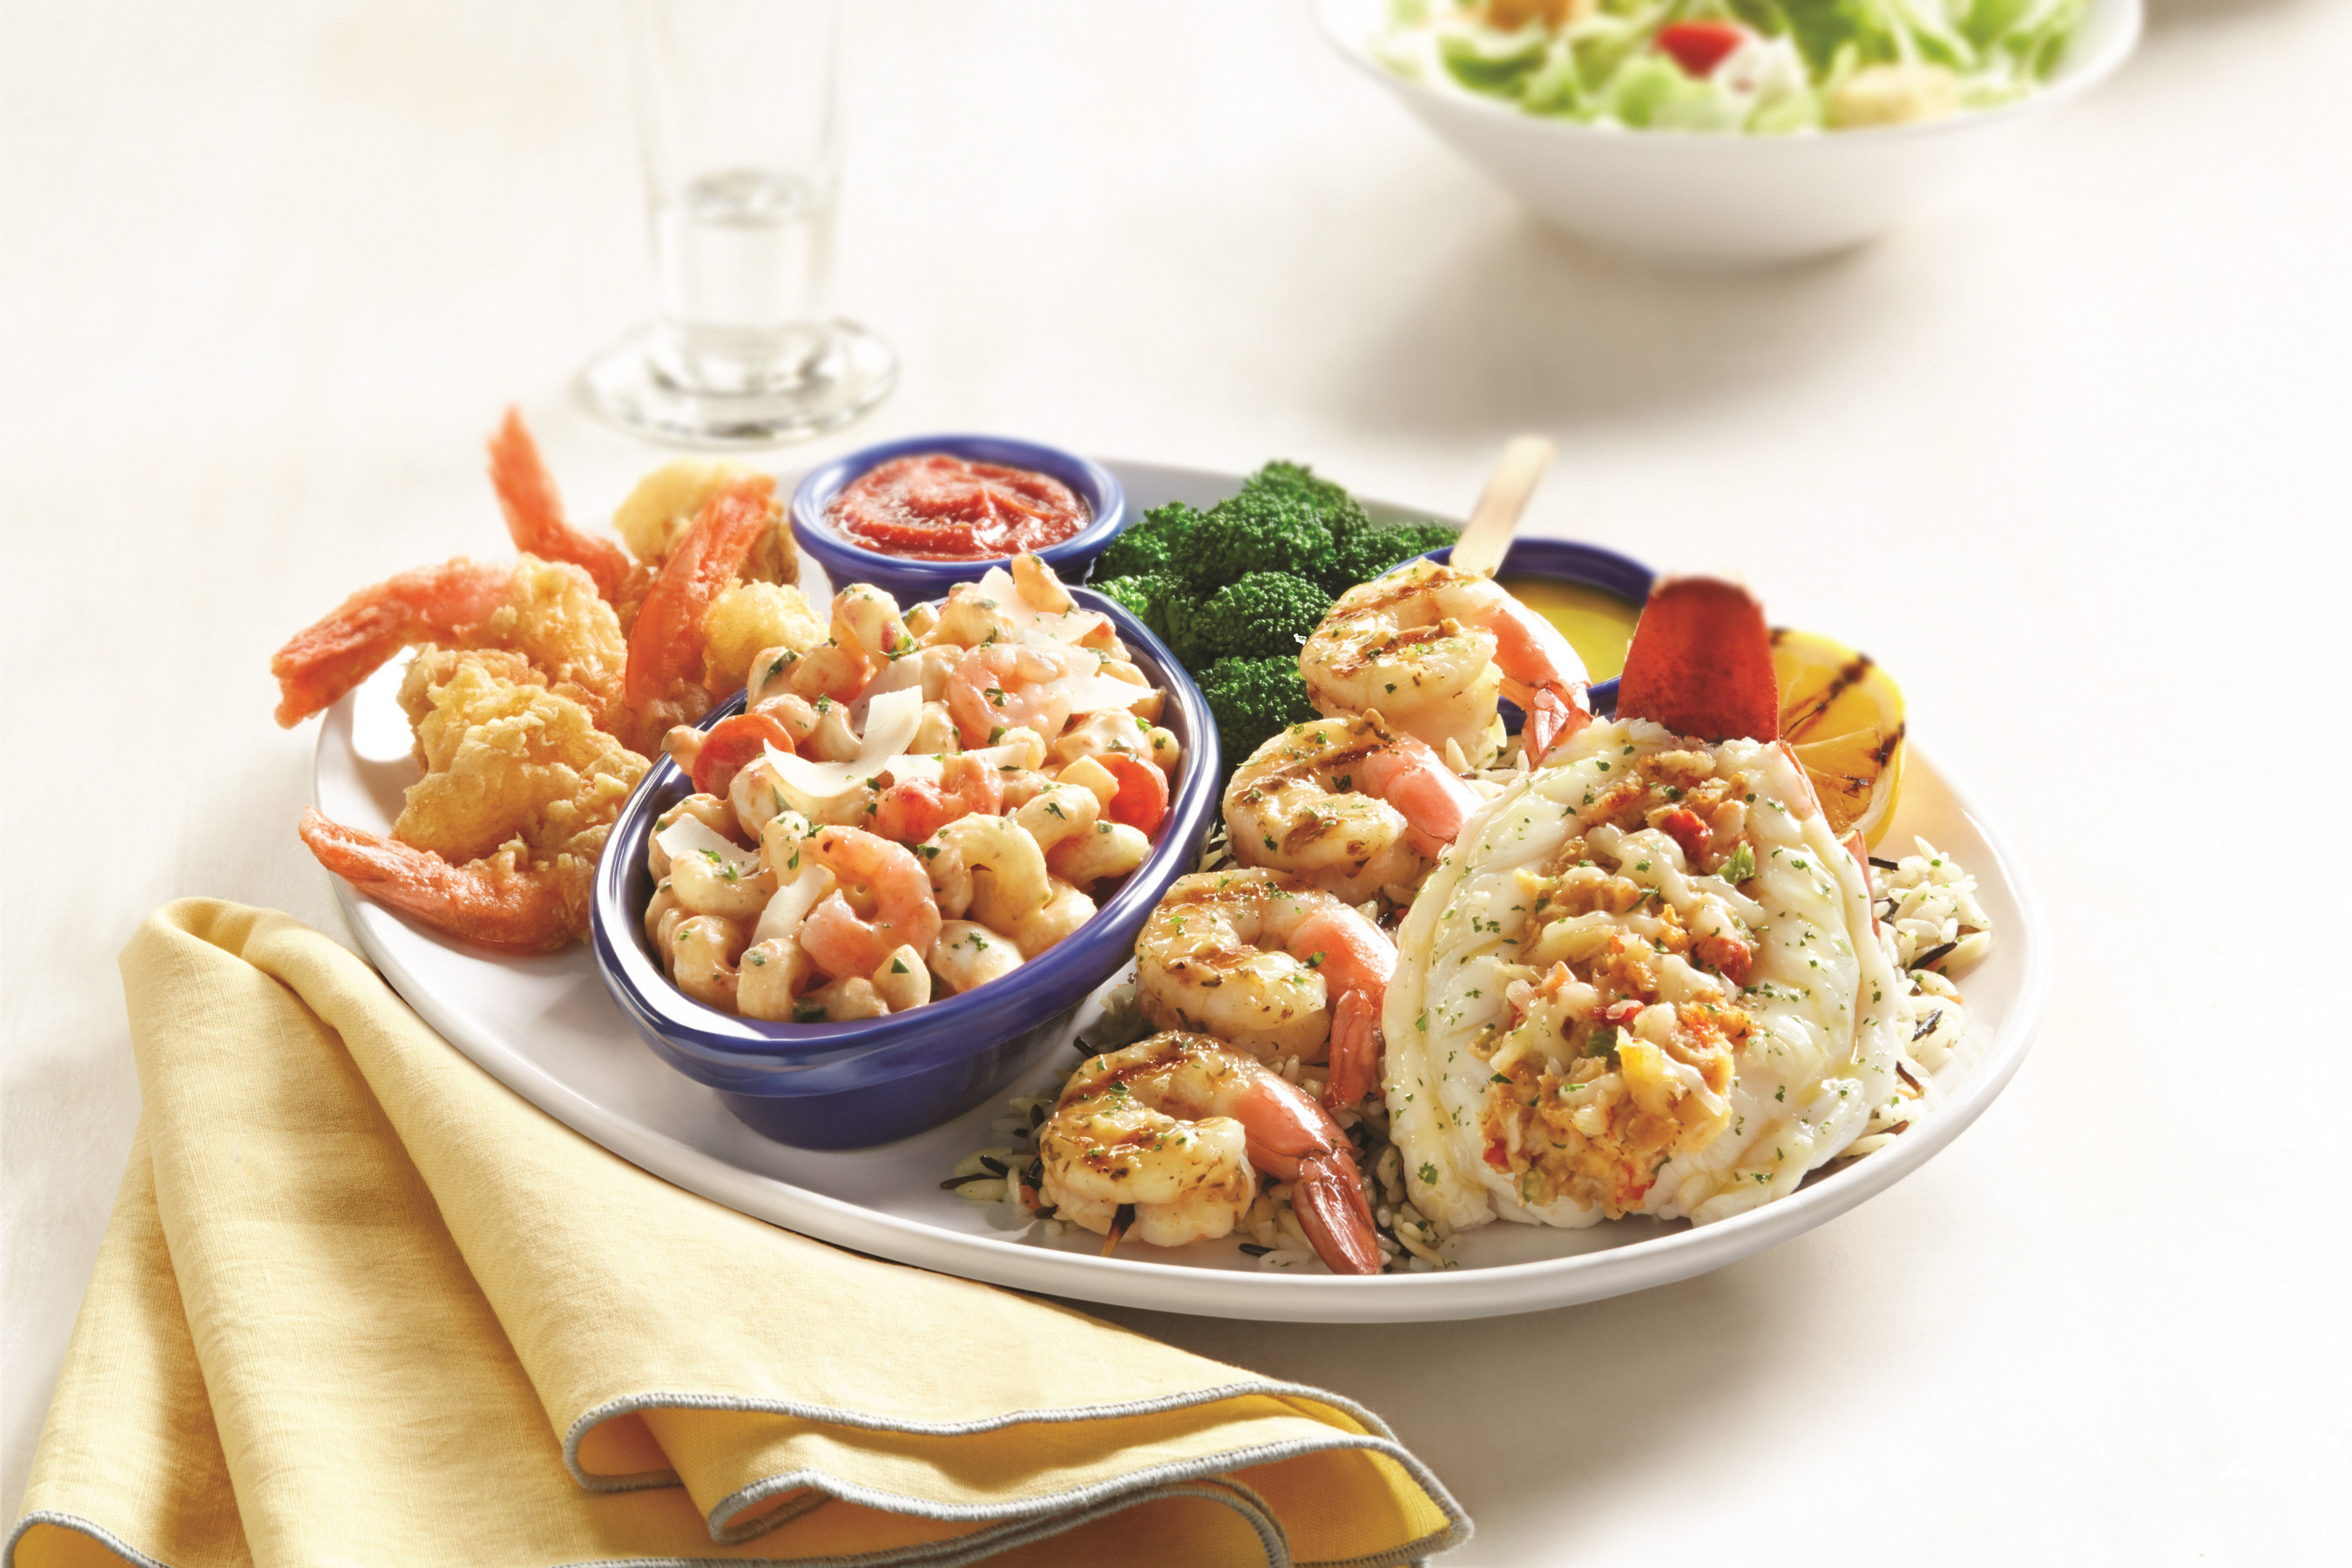 Red Lobster's new Lobster and Shrimp Overboard(TM) pairs a roasted and stuffed Maine lobster tail with a garlic-grilled jumbo shrimp skewer, Langostino Lobster and Shrimp Caprese Pasta and hand-battered jumbo shrimp.